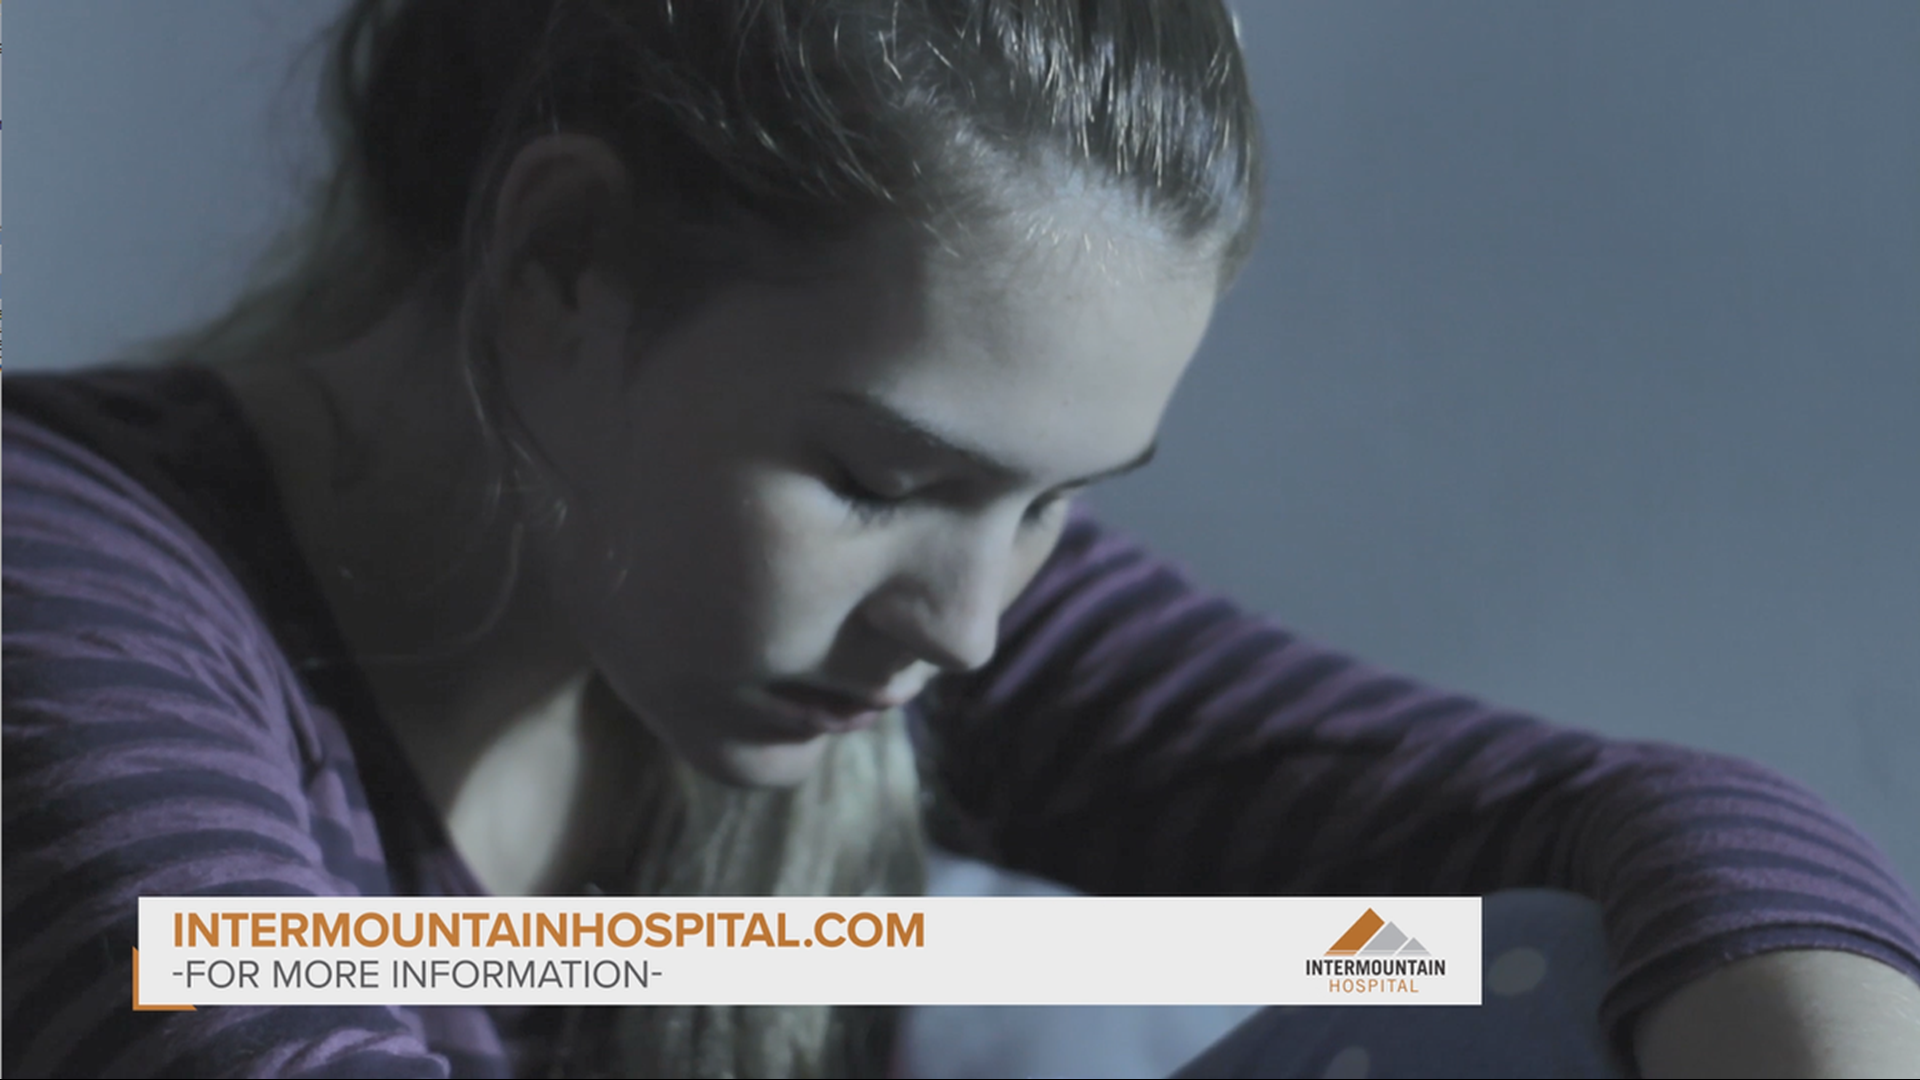 Intermountain Hospital in Boise offers 40 years of experience to help people recover from a wide range of mental health issues and addiction